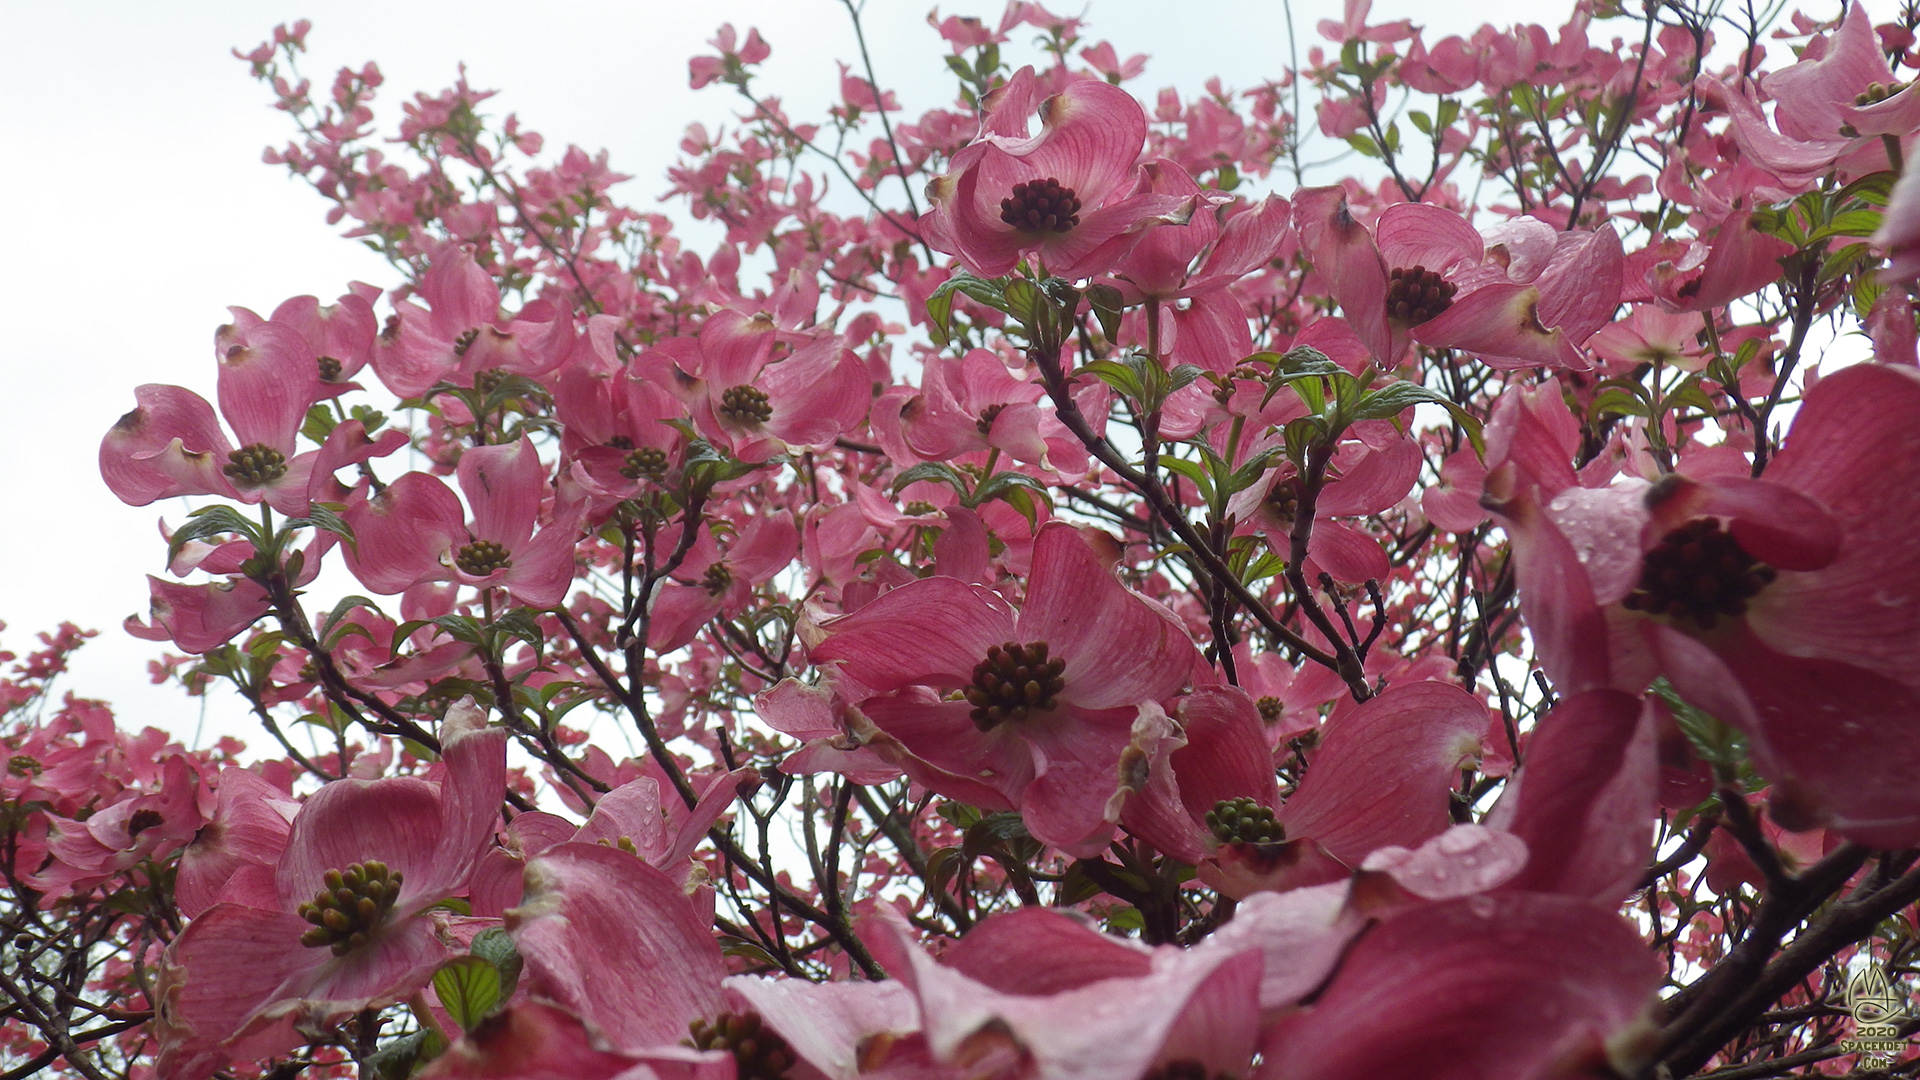 Dogwood blossoming in the rain